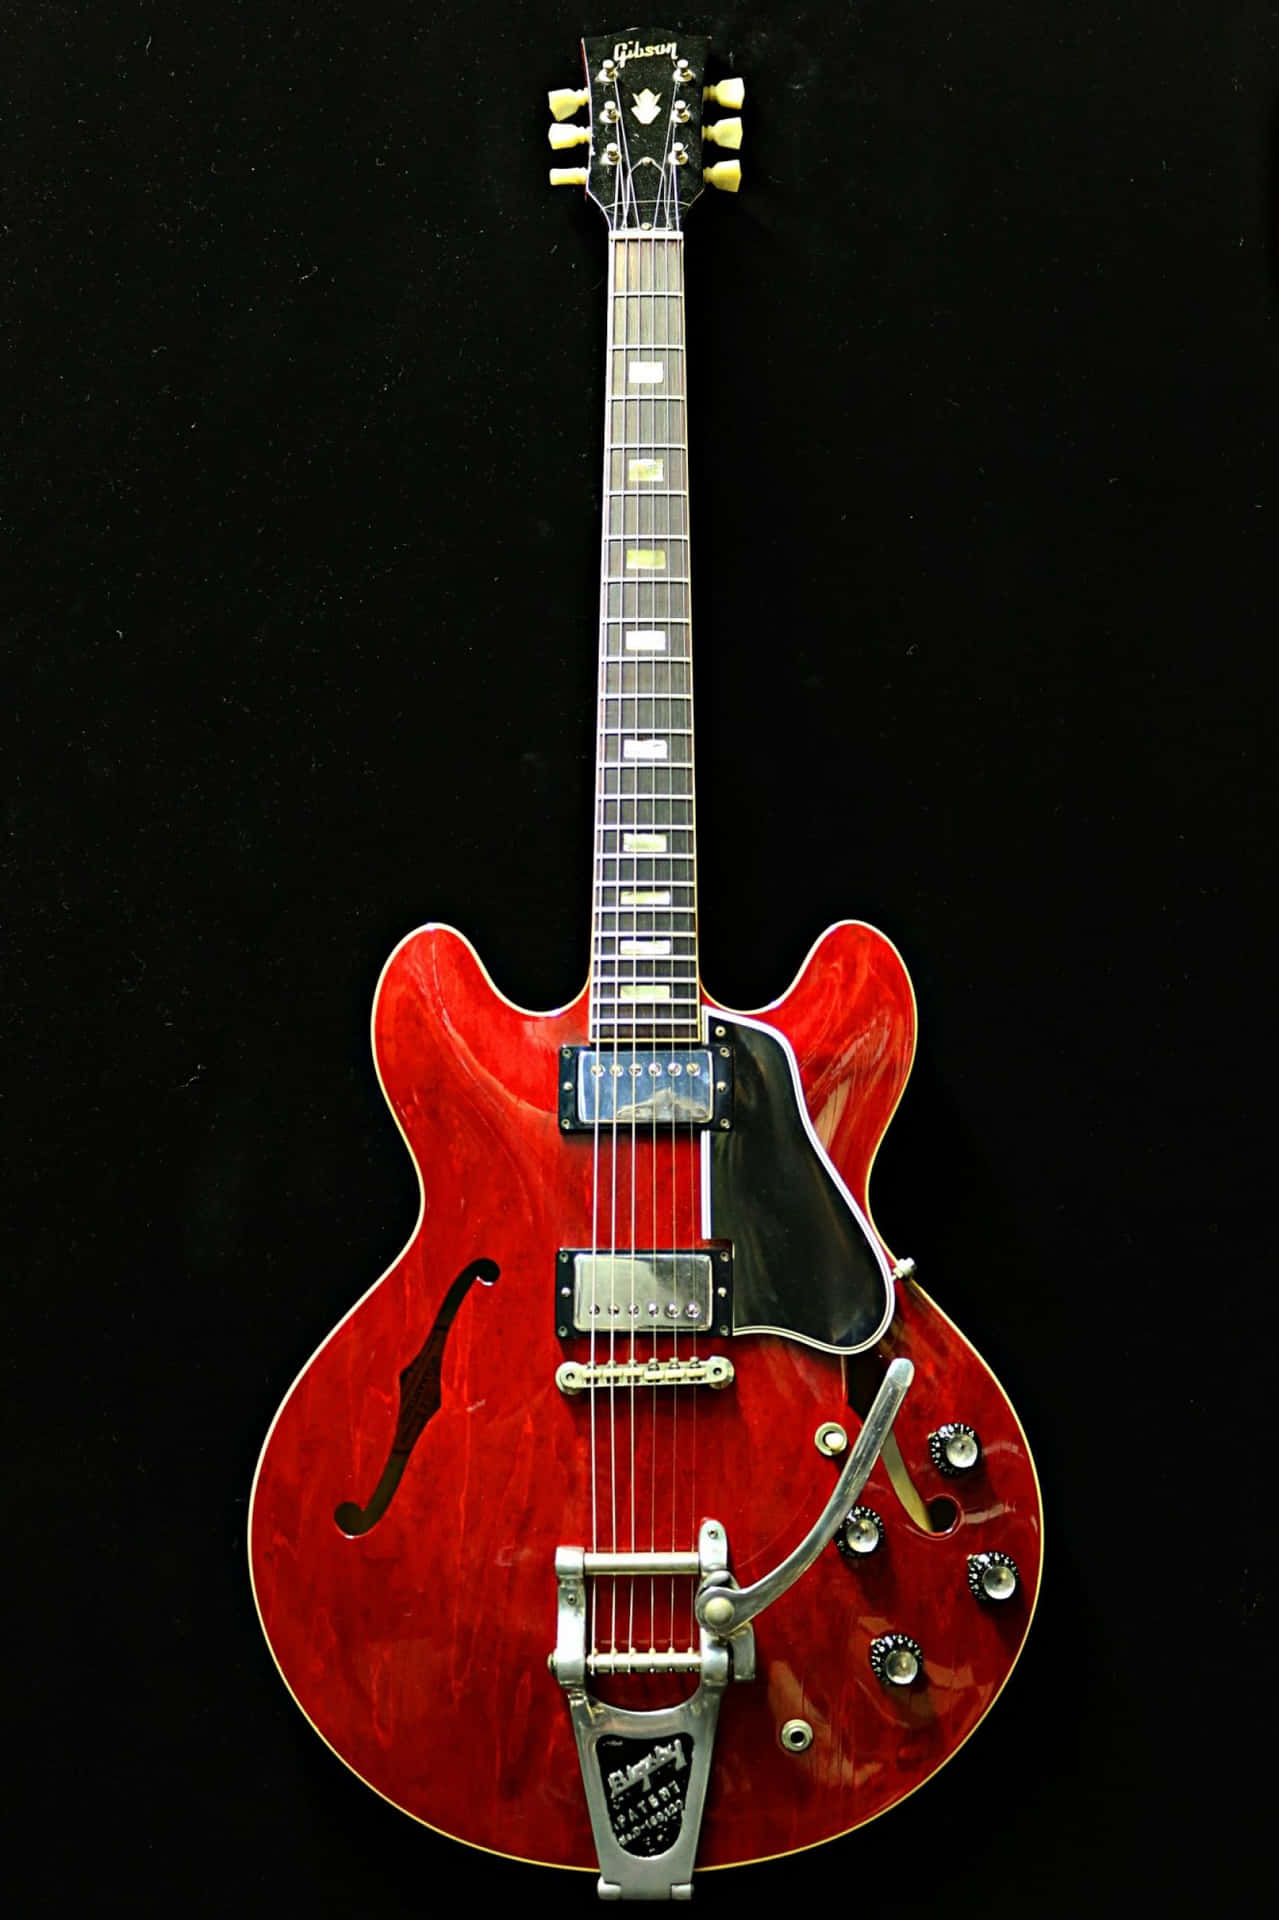 Red Gibson 335 On Solid Black Wallpaper